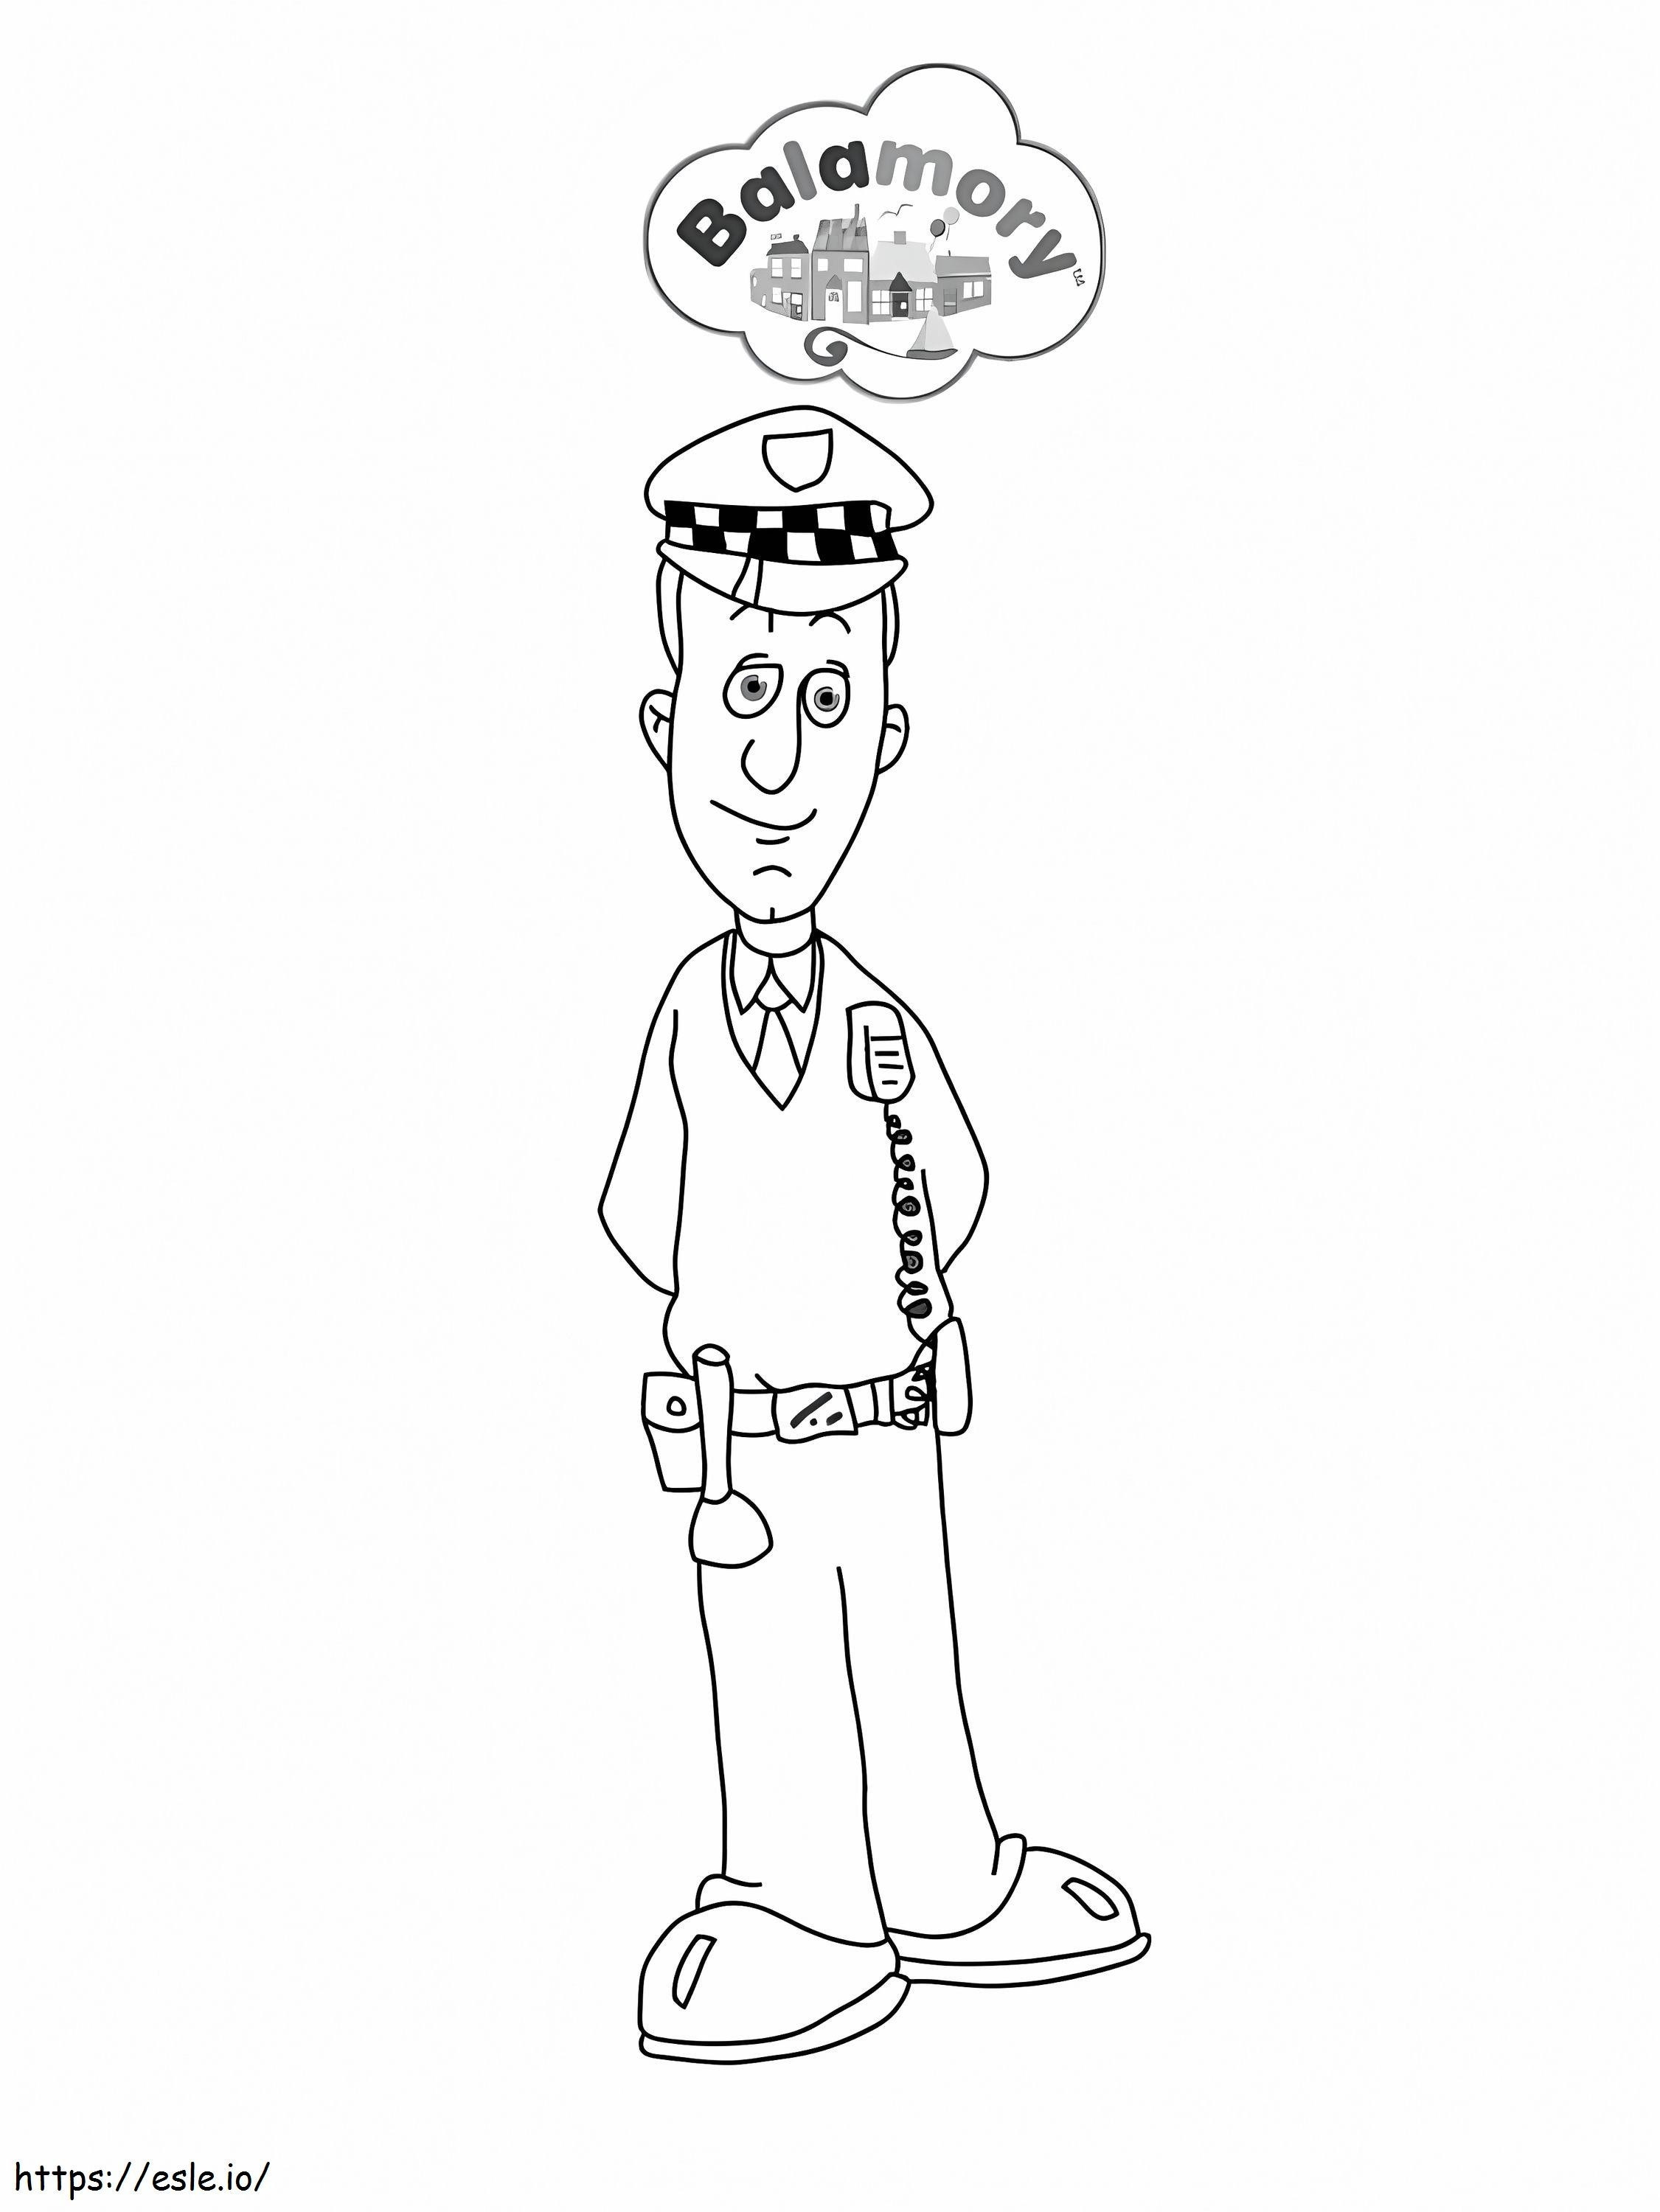 1584669870 Bal 013 coloring page